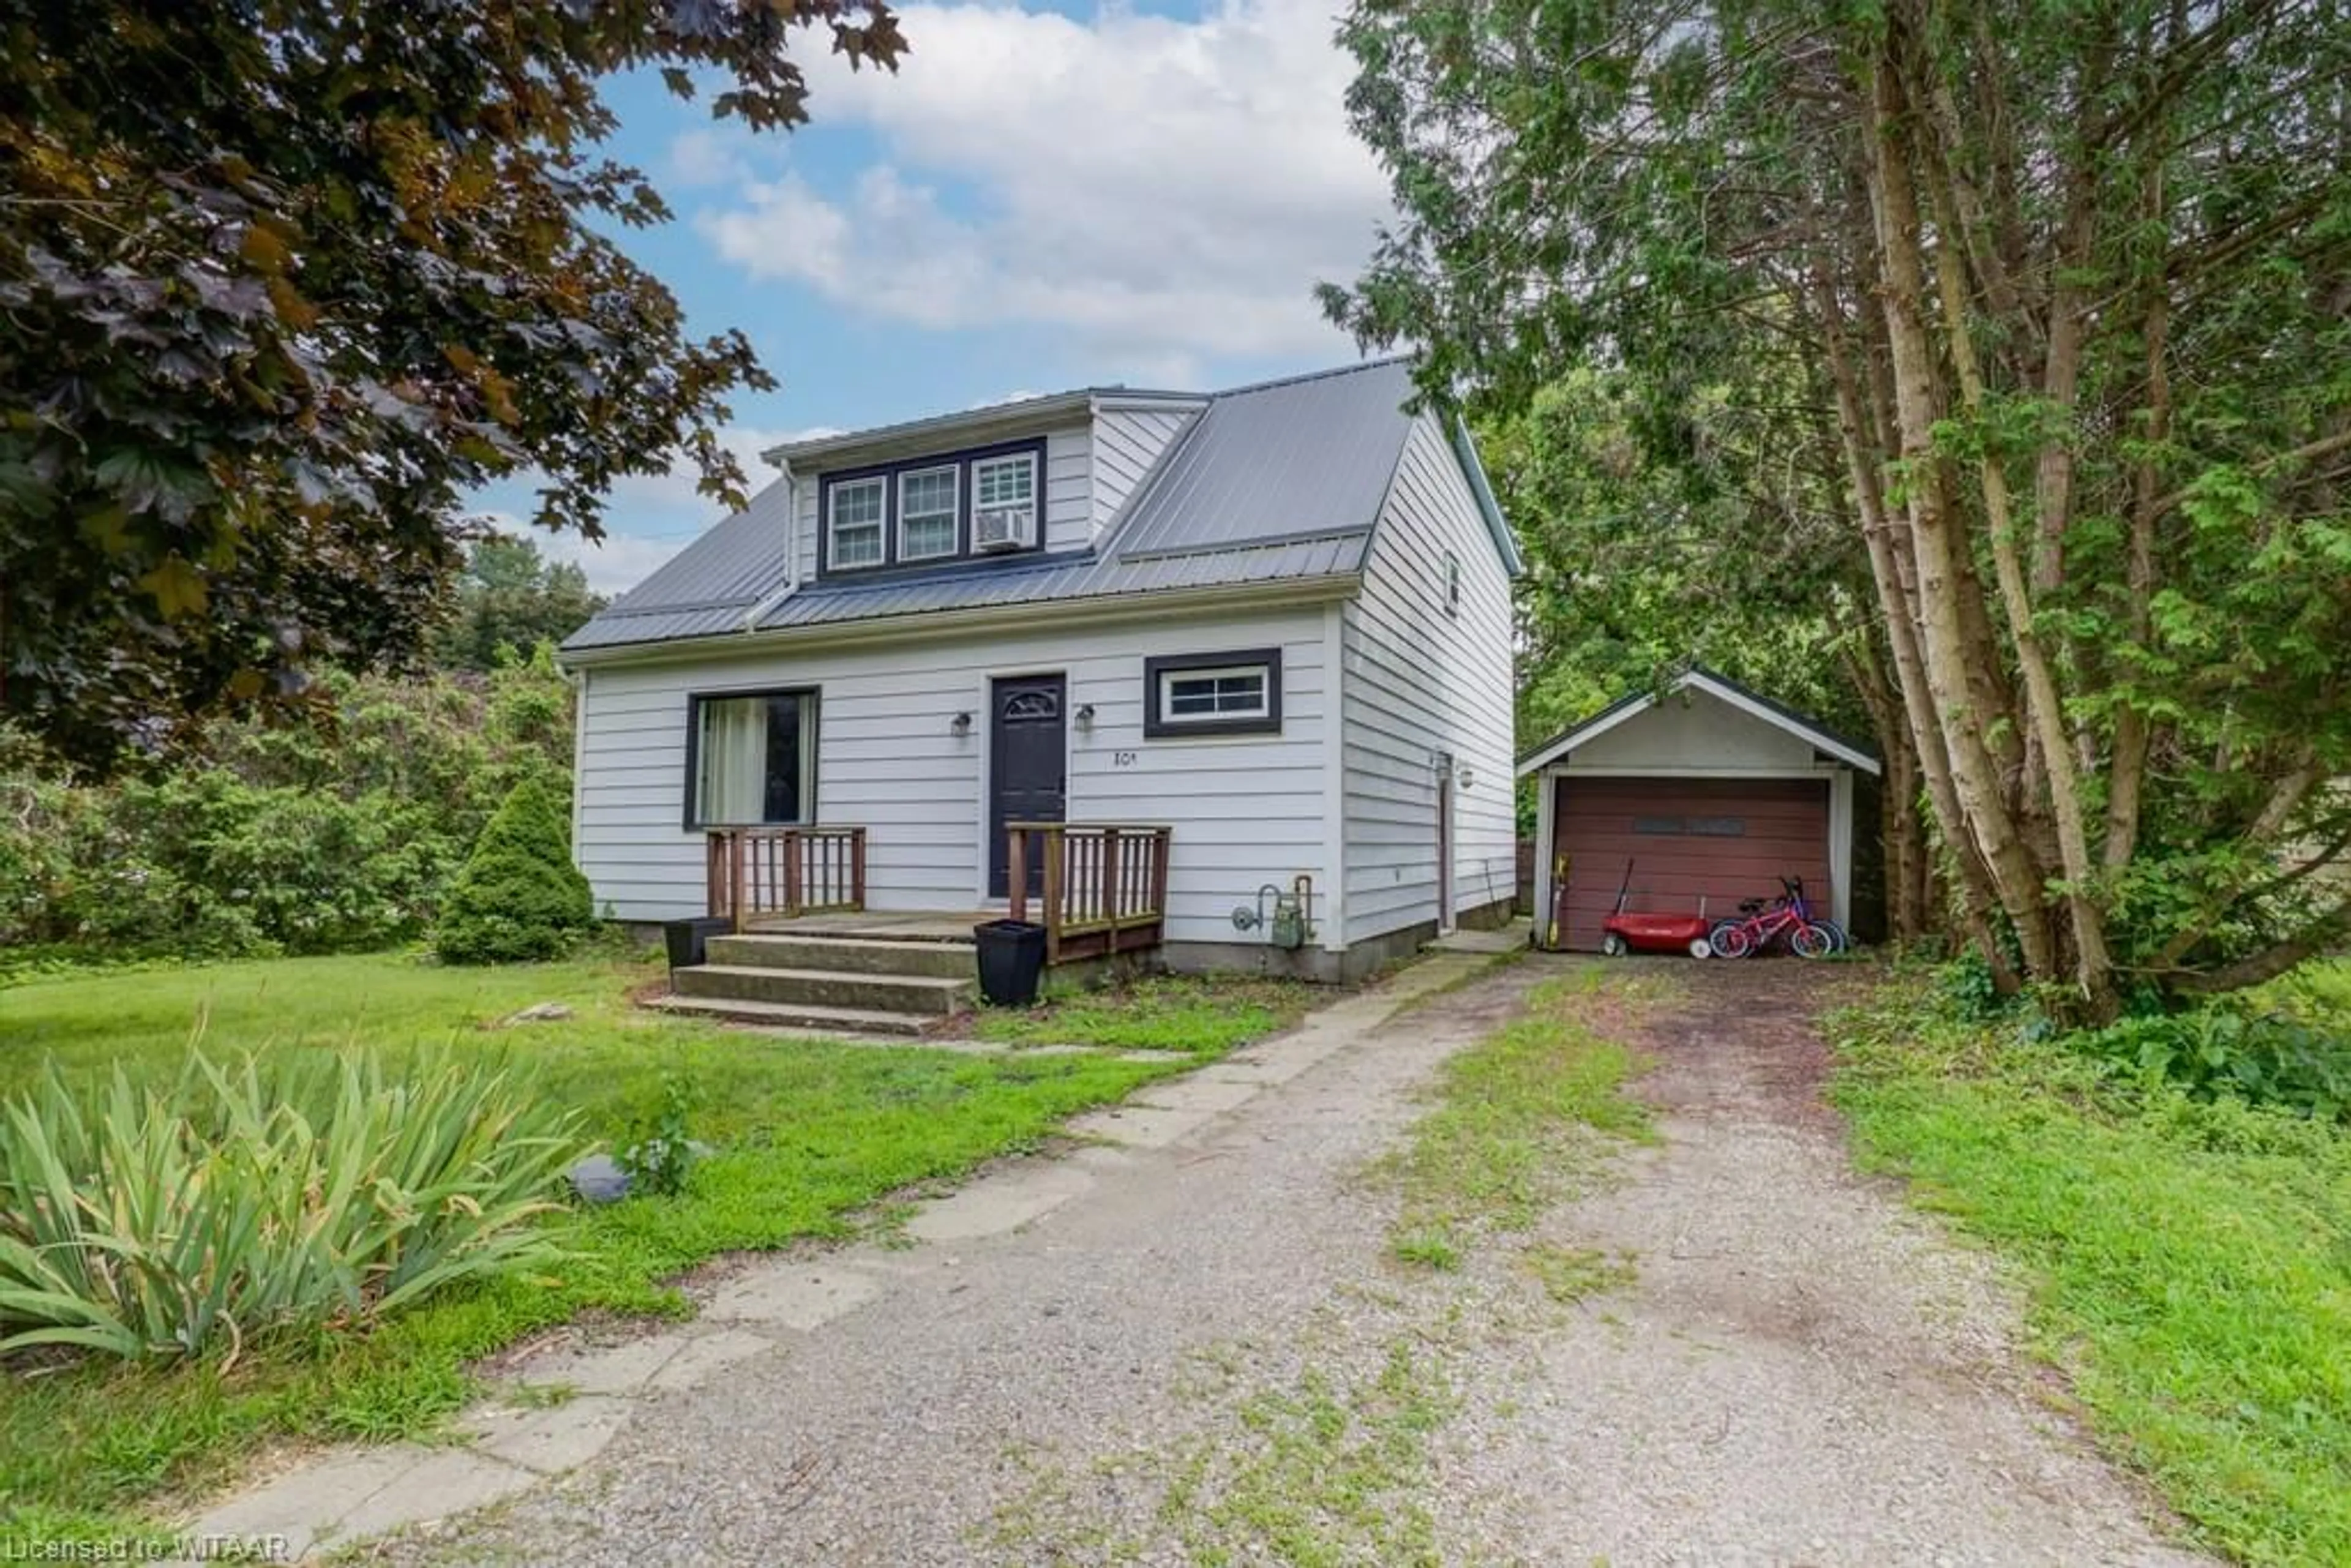 Cottage for 301 Main St, Otterville Ontario N0J 1R0